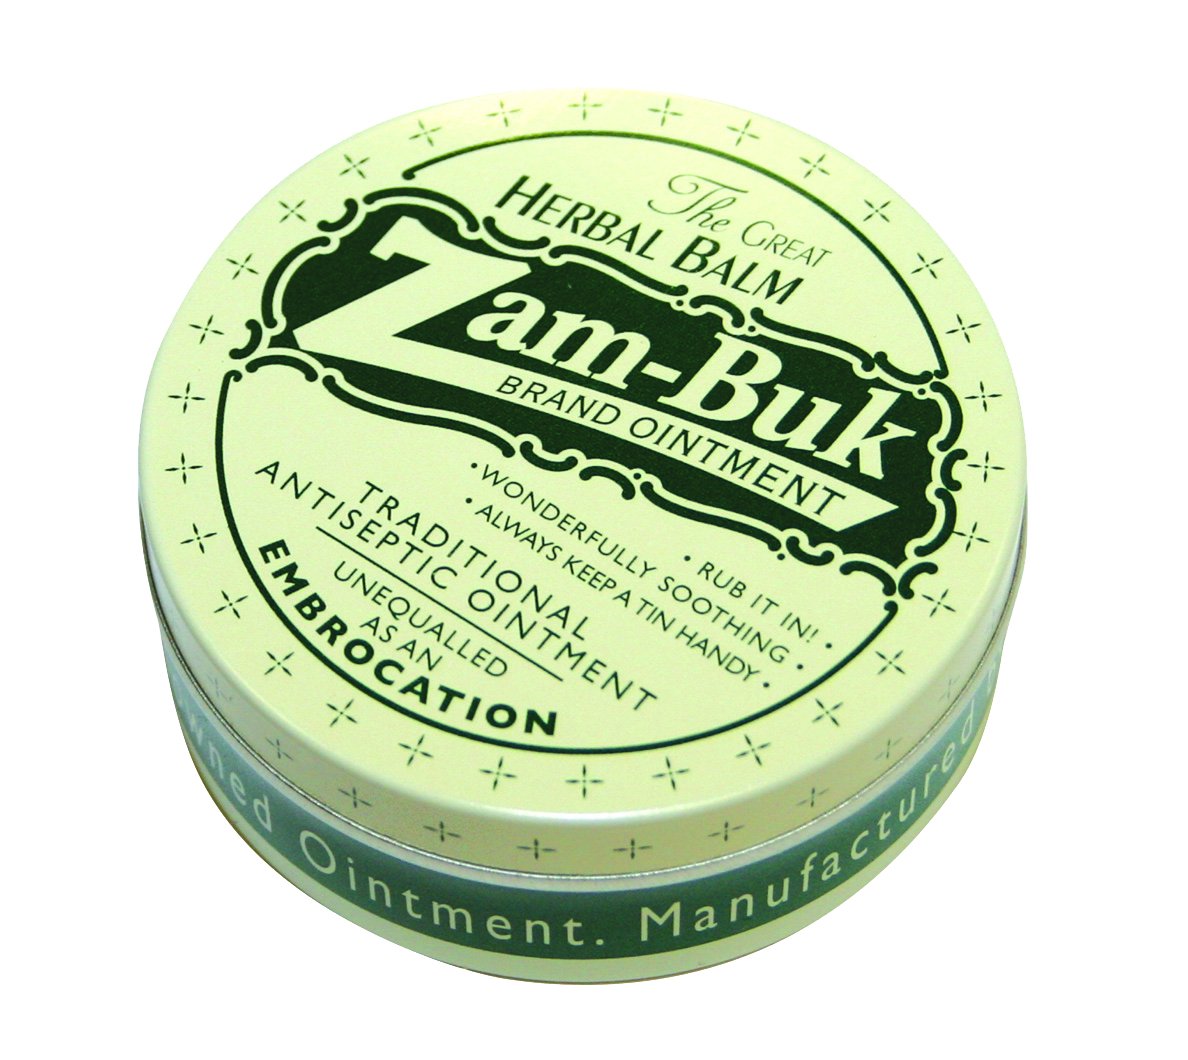 Rose And Co Zam Buk Brand Ointment Herbal Traditional Antiseptic Ointment 20g